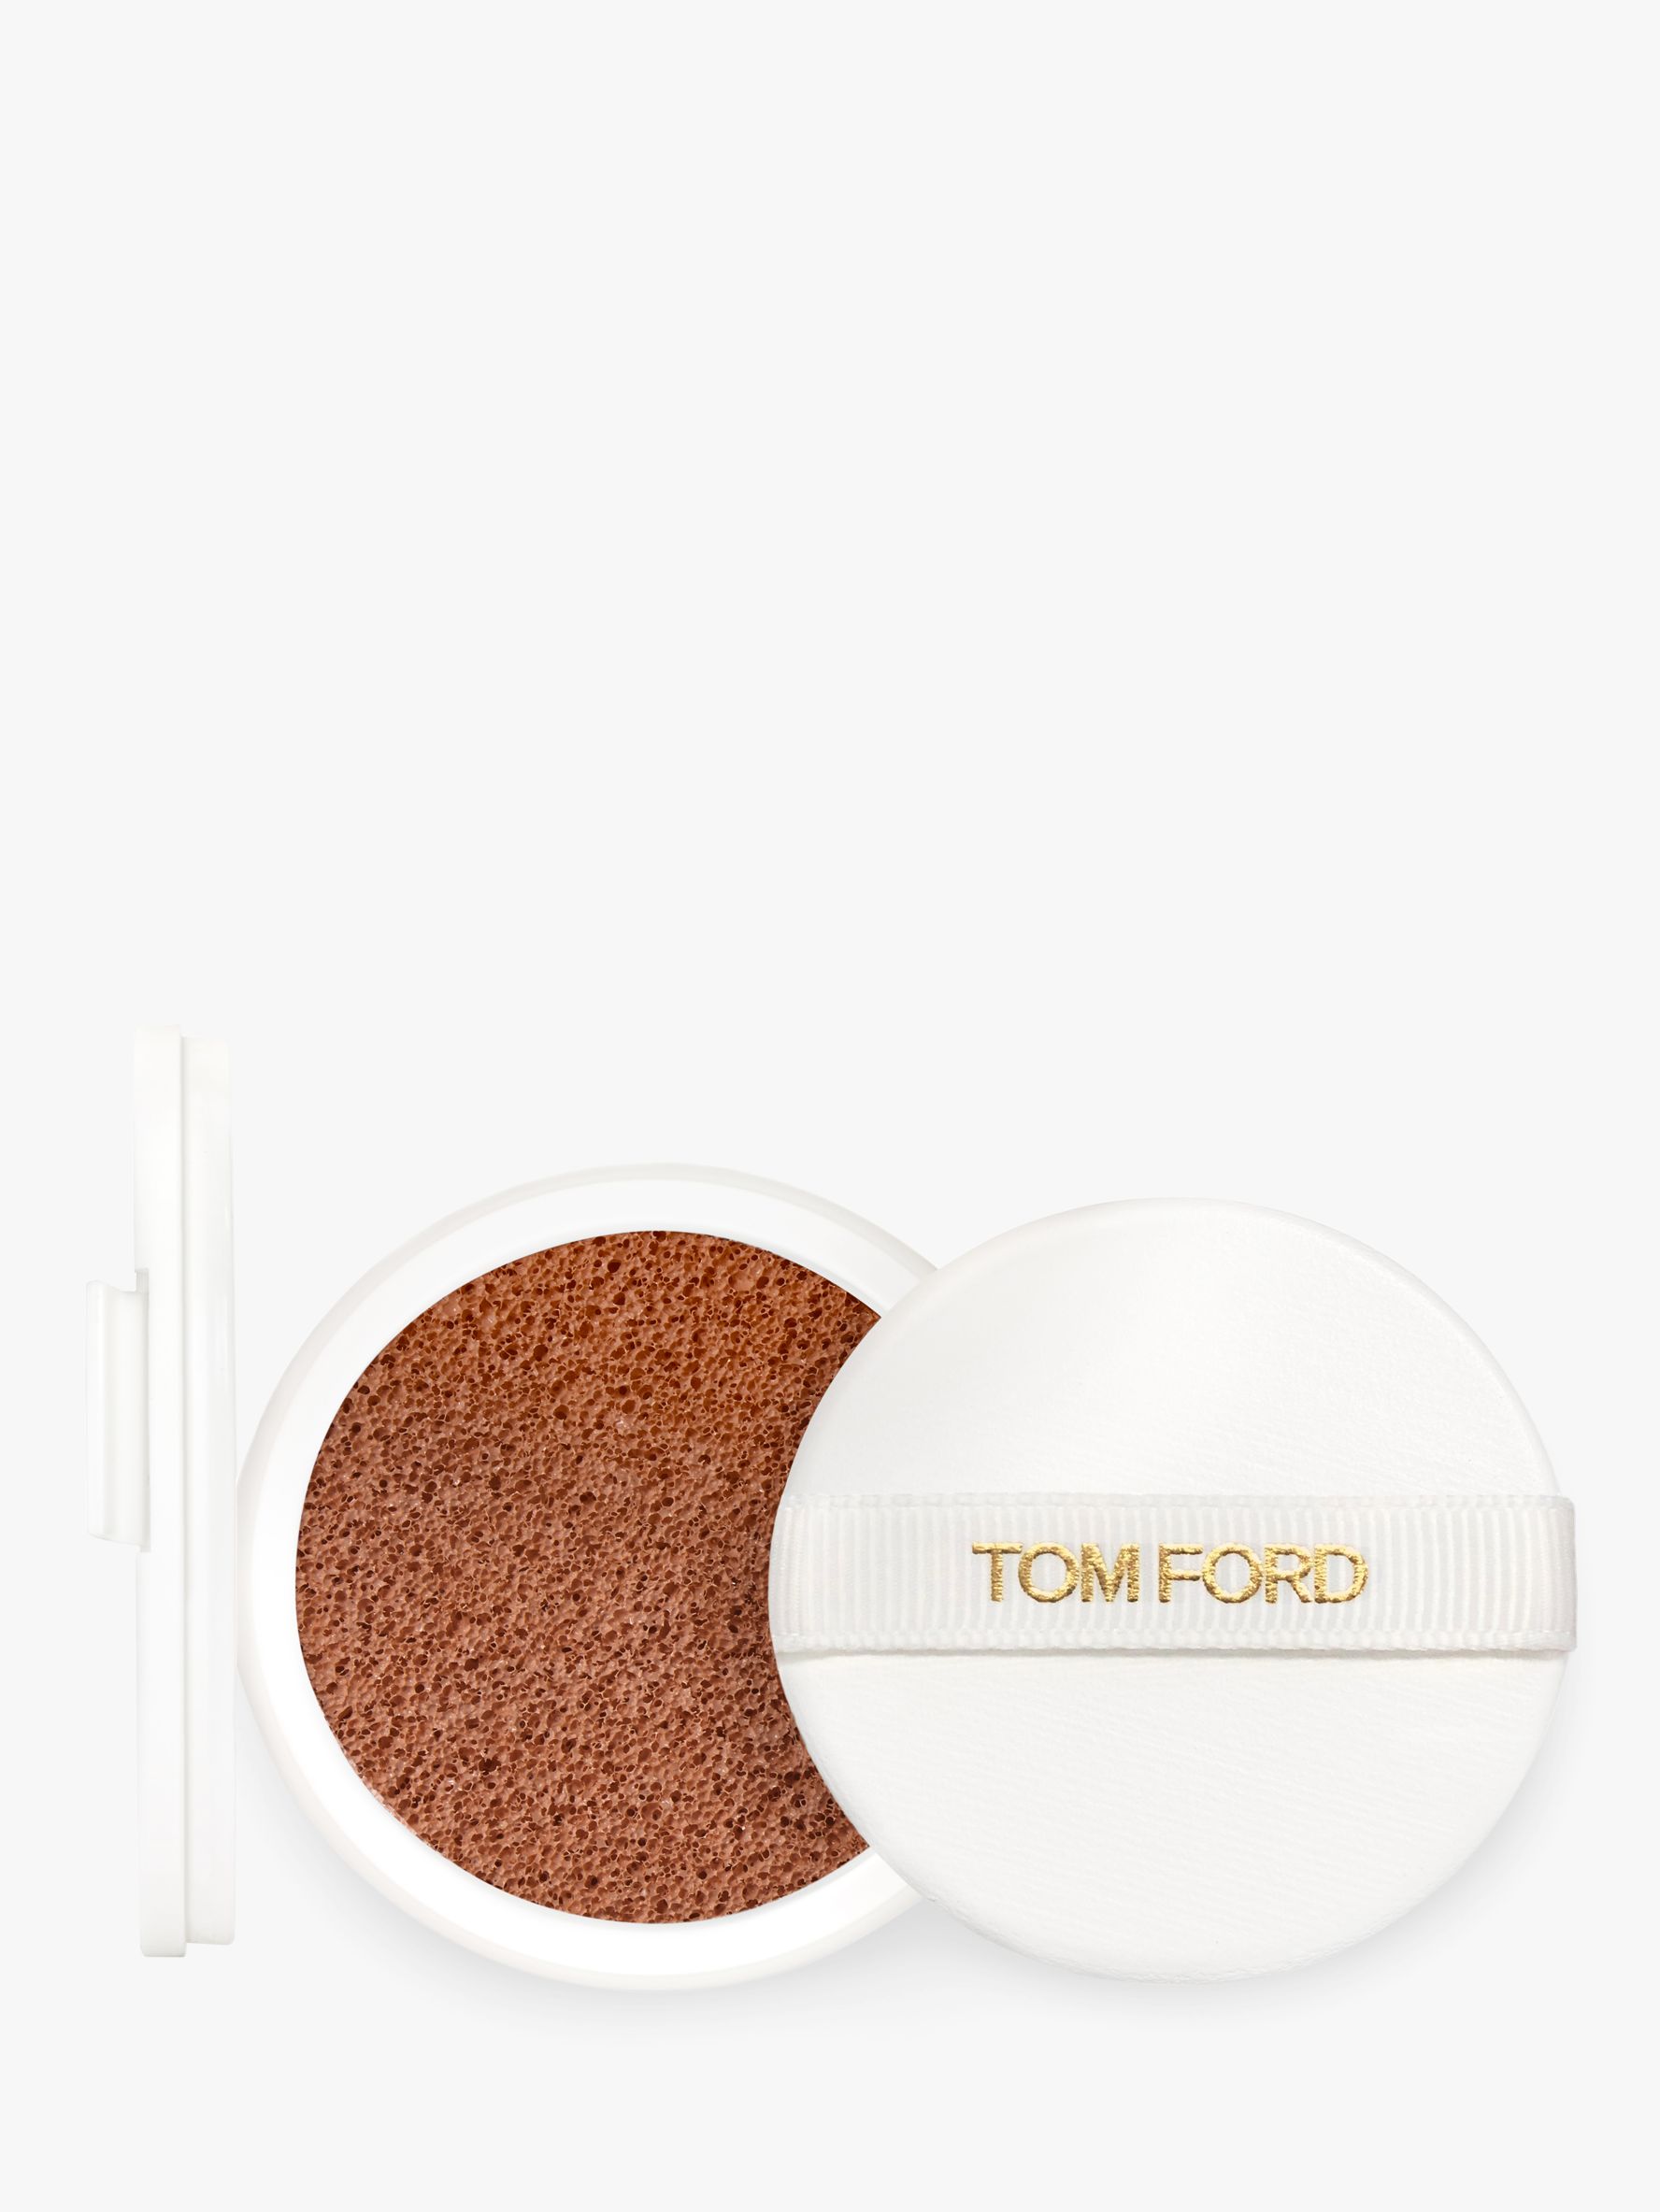 TOM FORD Glow Tone Up Foundation SPF 40 Hydrating Cushion Compact Foundation  Refill